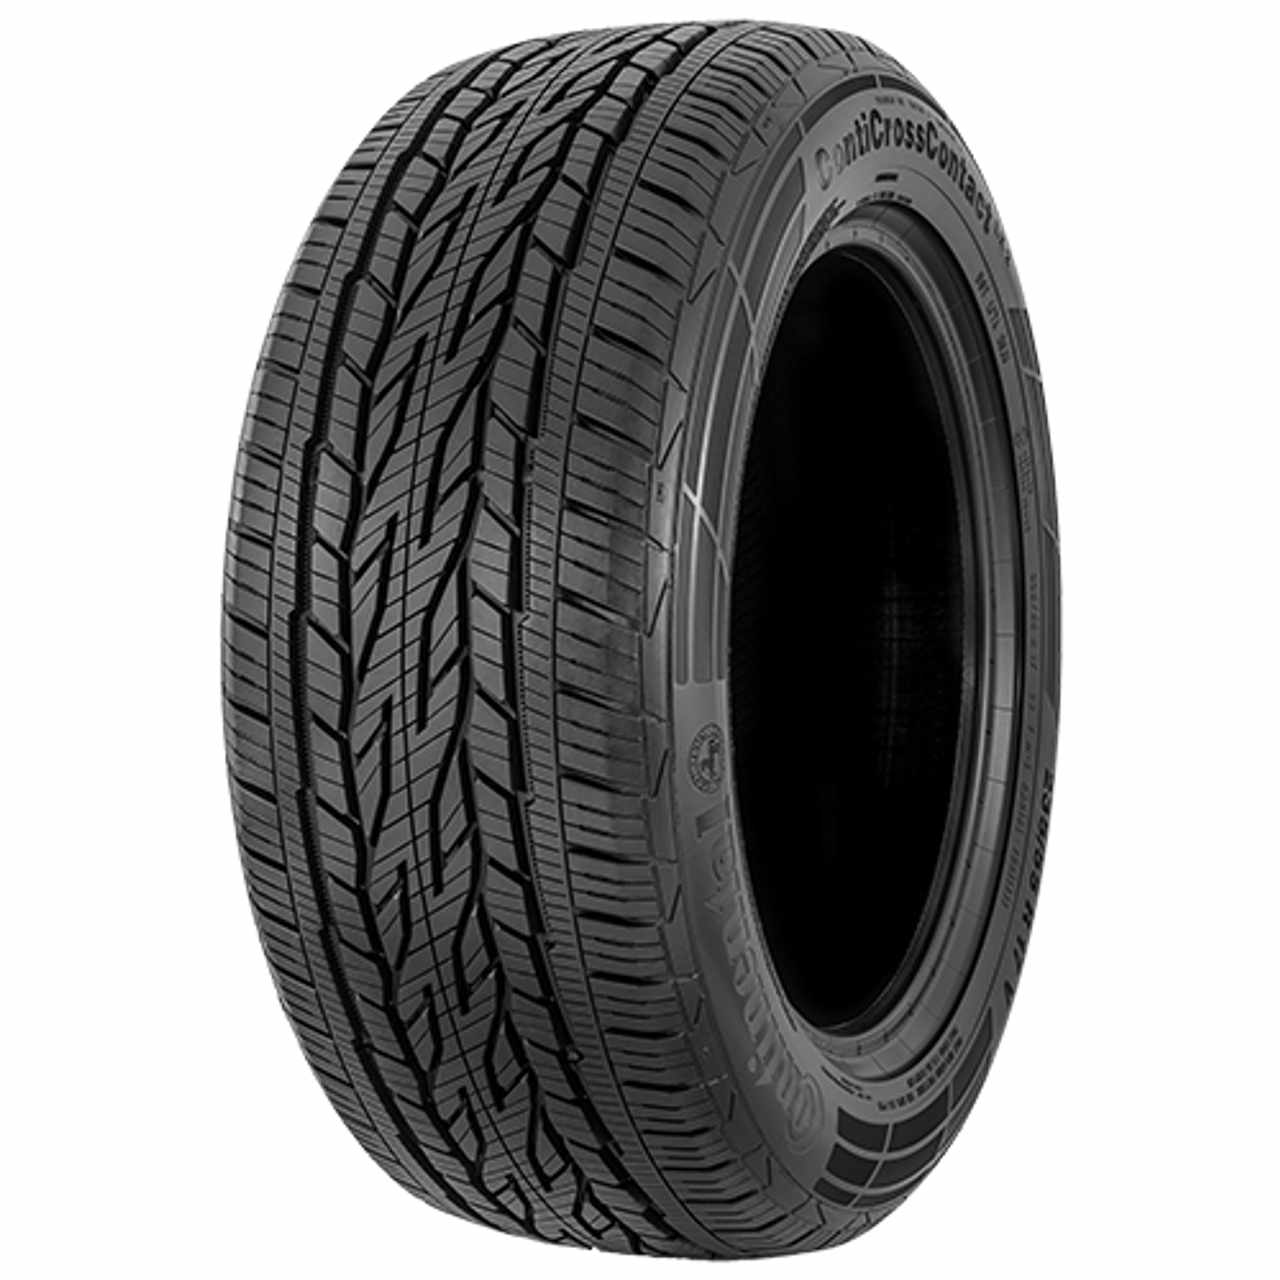 CONTINENTAL CONTICROSSCONTACT LX 2 (EVc) 225/75R15 102T FR BSW